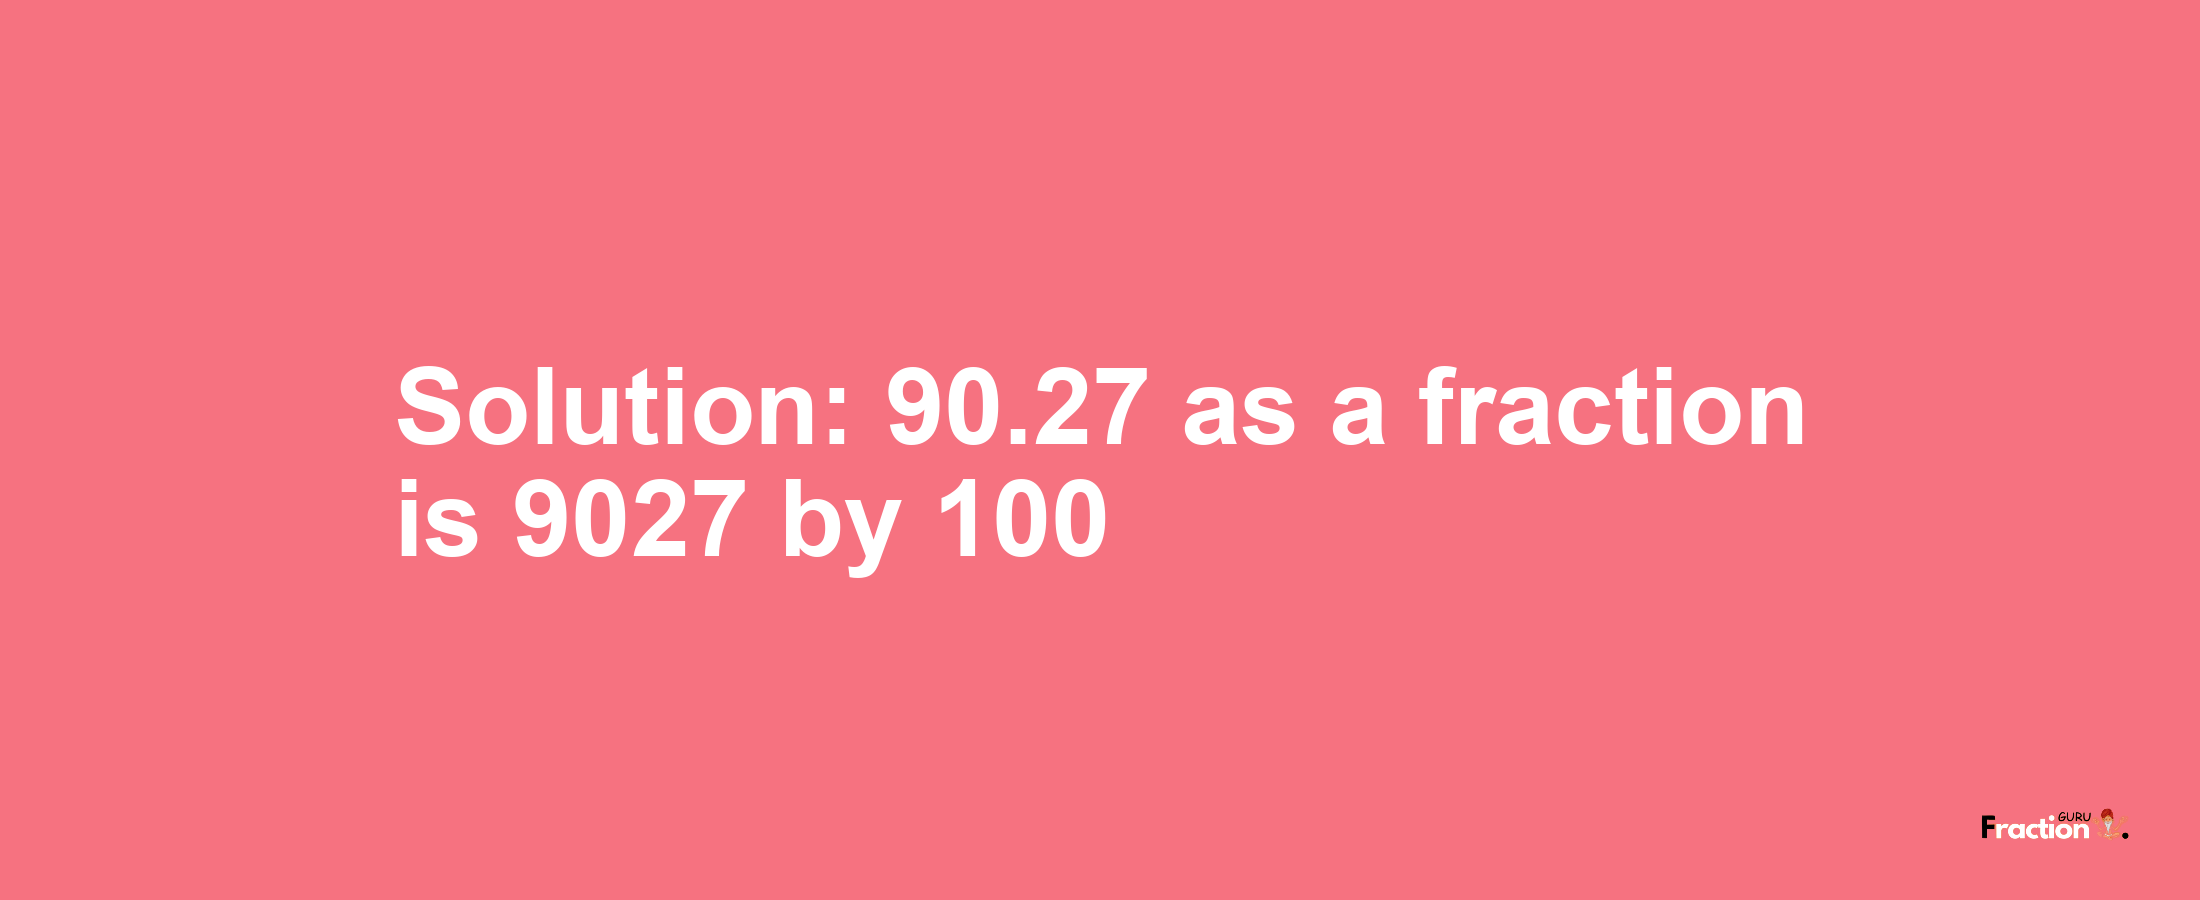 Solution:90.27 as a fraction is 9027/100